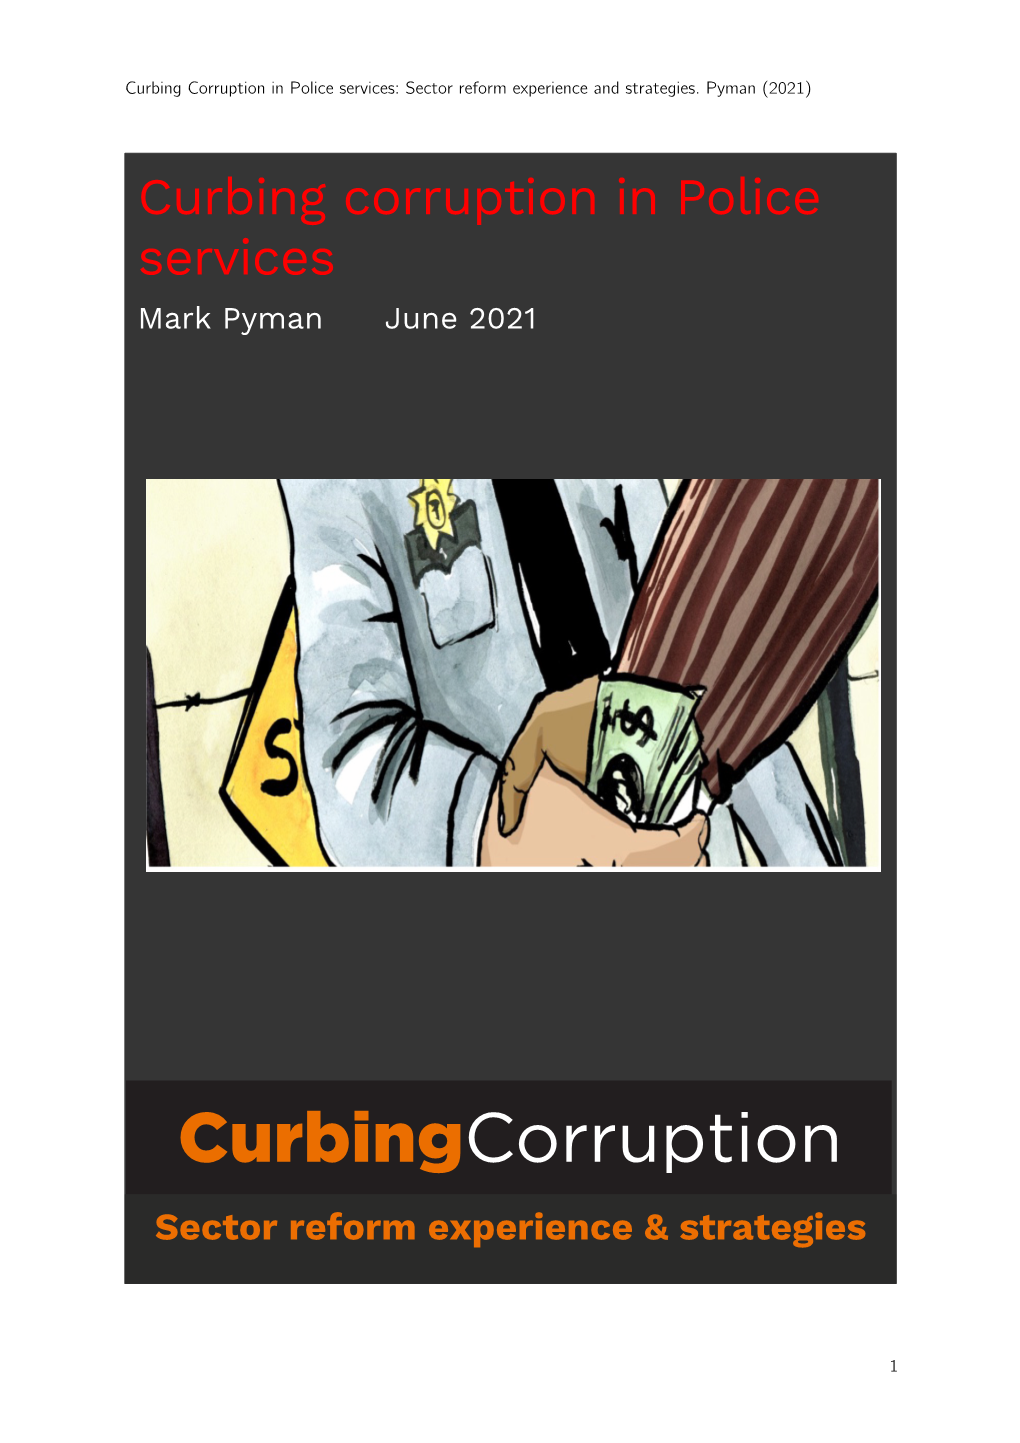 Curbing Corruption in Police Services: Sector Reform Experience and Strategies. Pyman (2021)